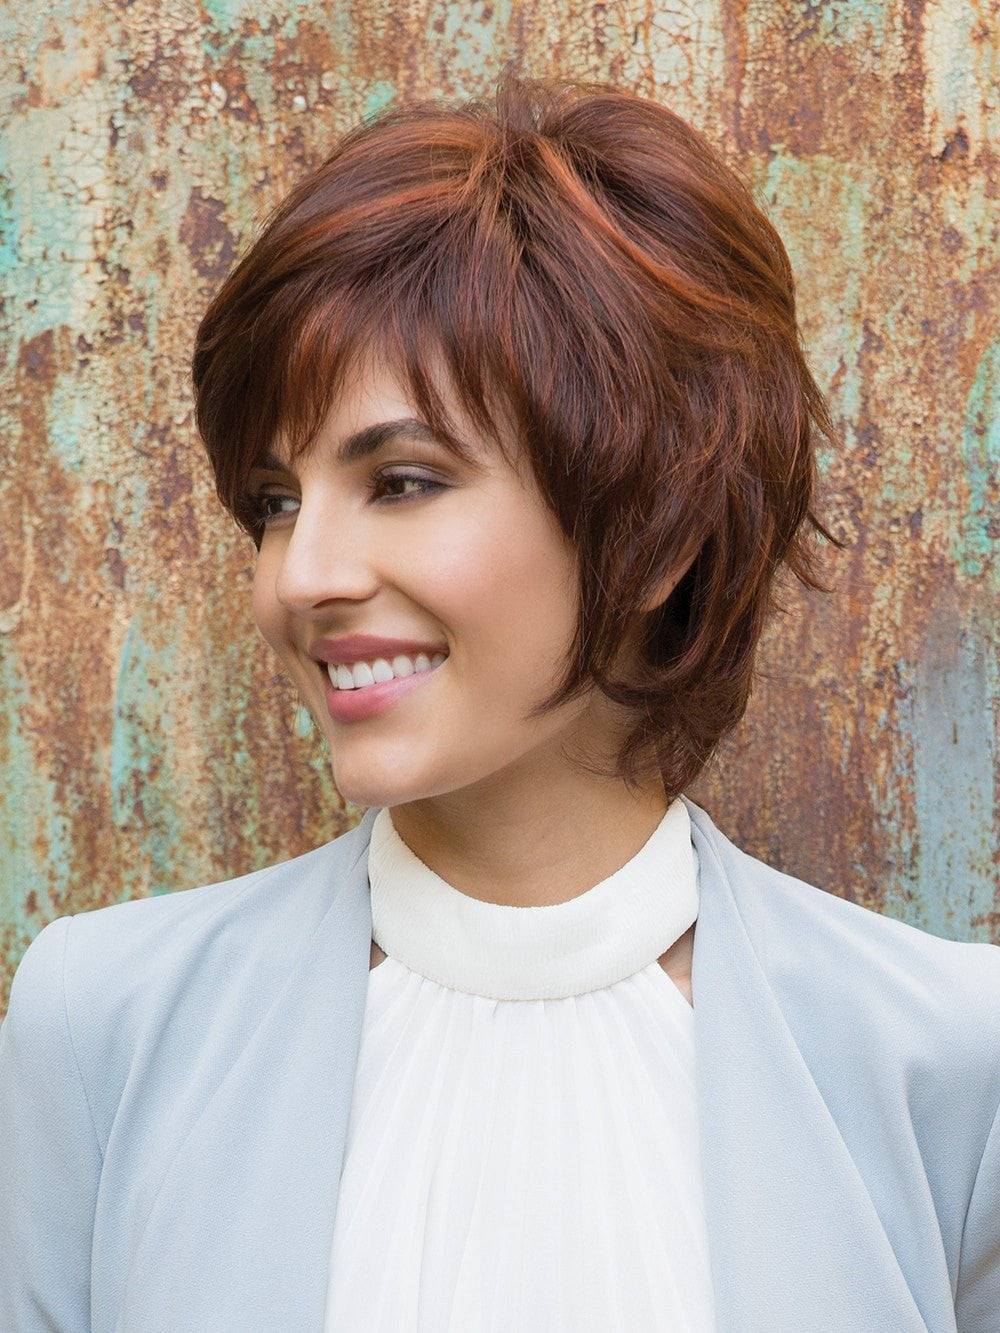 Give this short wig a shake and a quick spritz to awaken the tousled style. Then, finger style to achieve the desired look